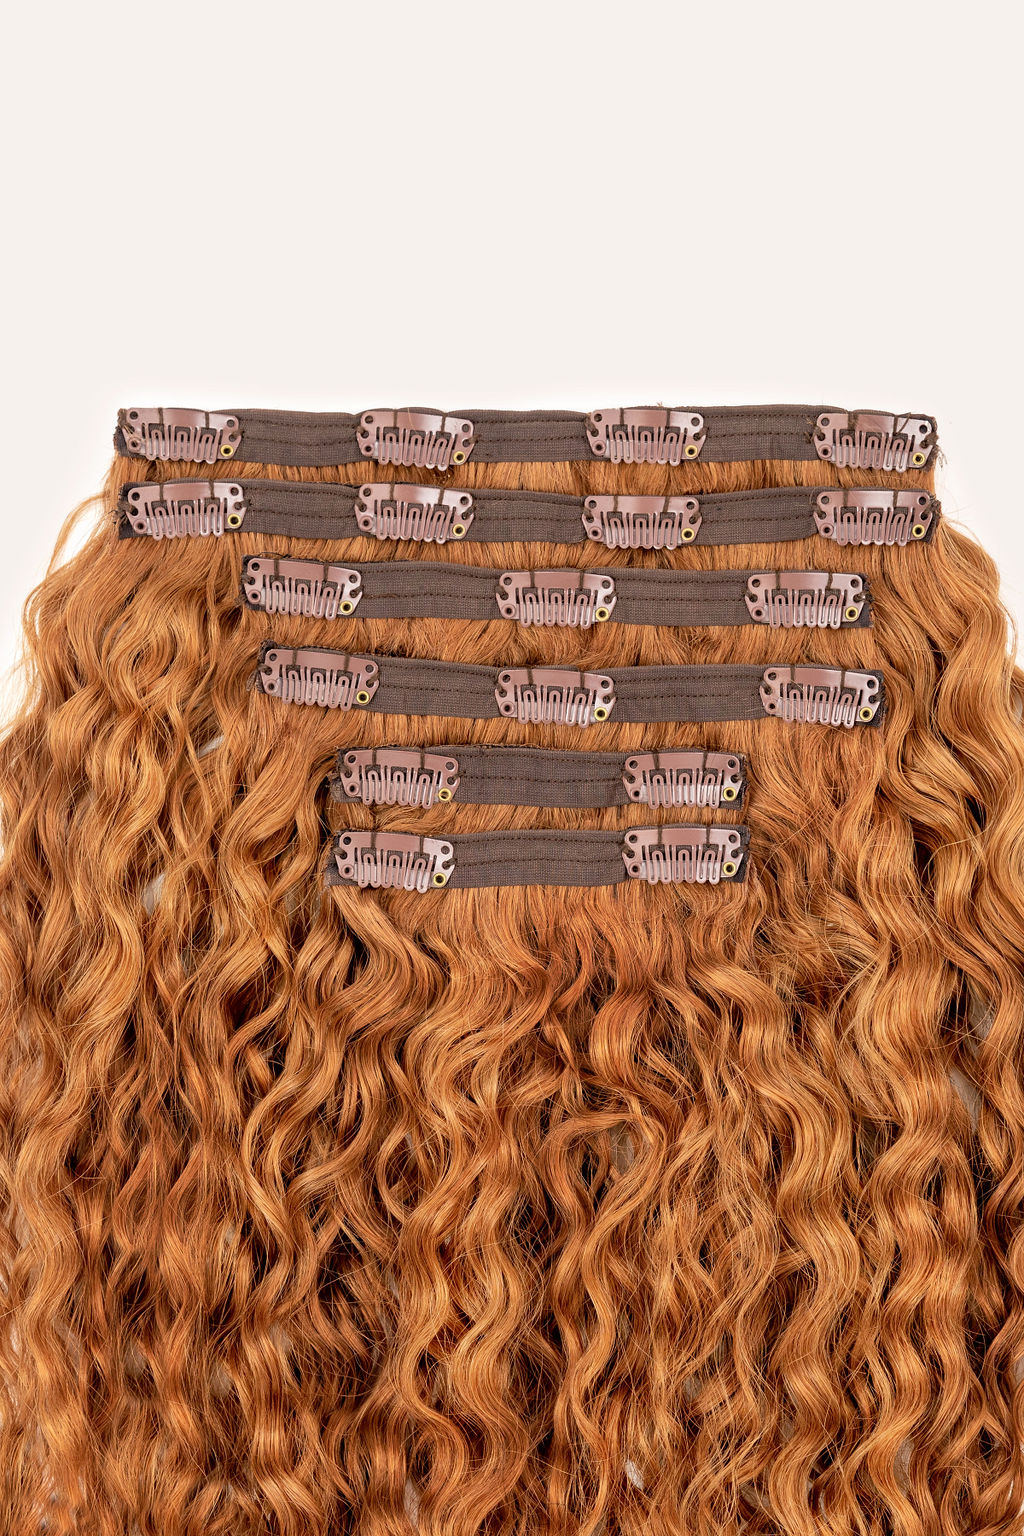 Strawberry Blonde Spiral Clip-In Hair Extensions